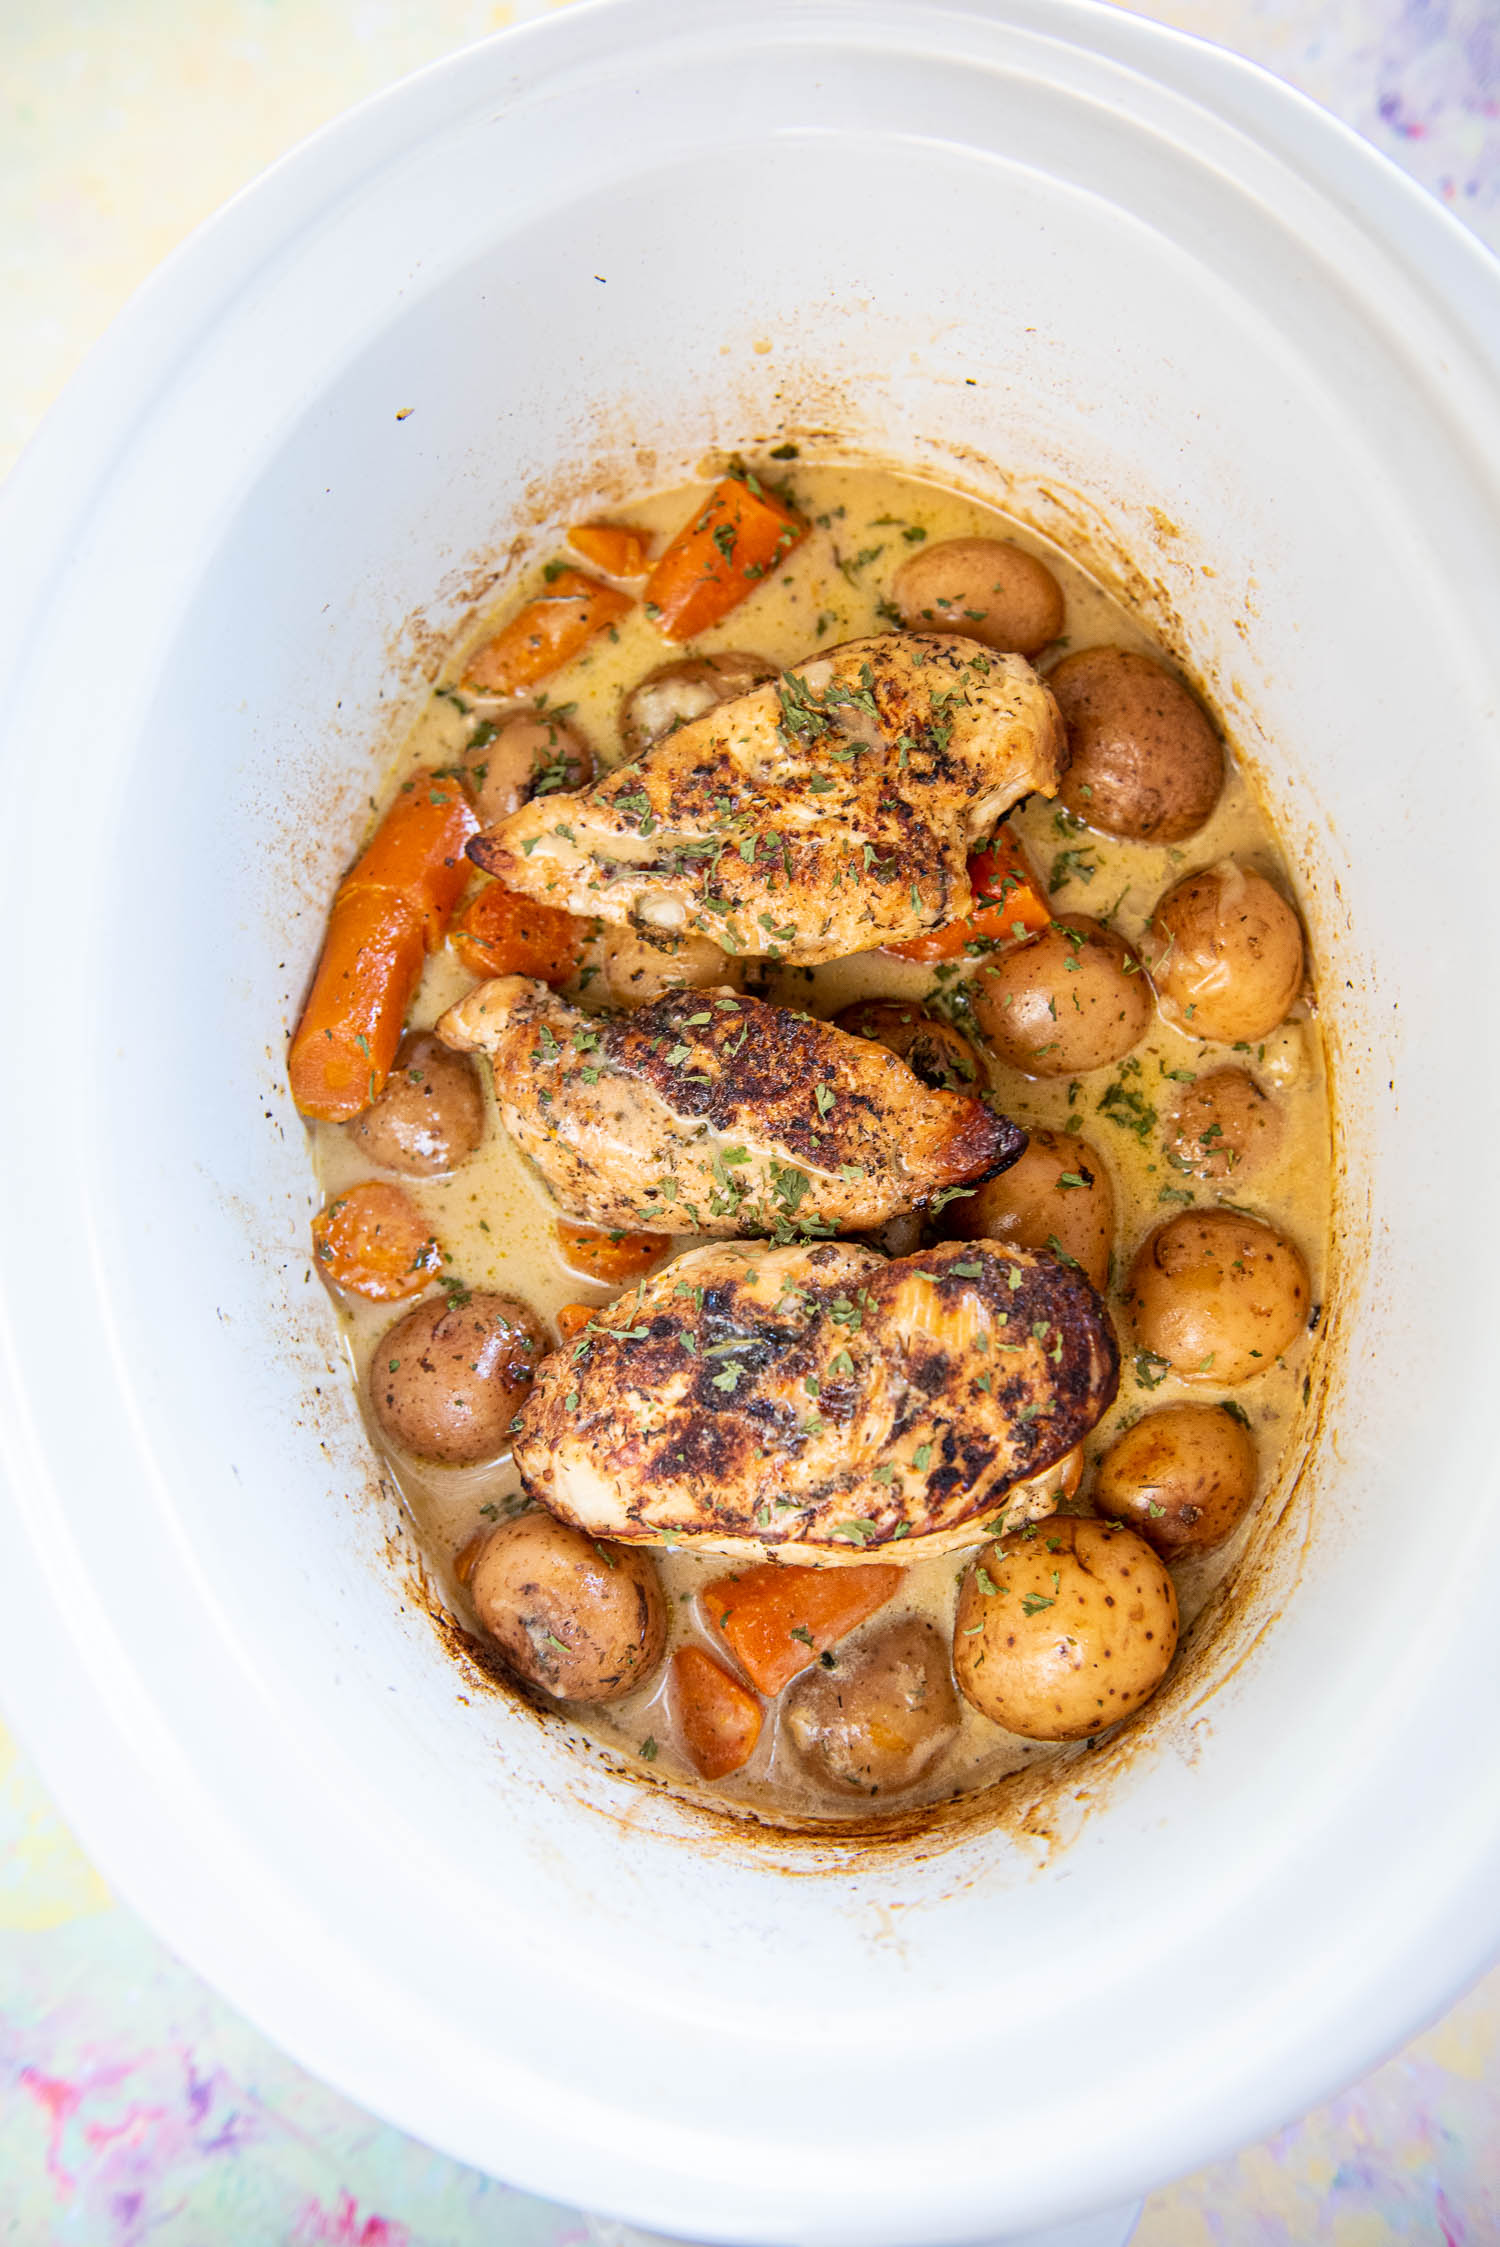 overhead view of white slow cooker with cooked baby potatoes, carrot chunks, chicken breasts and gravy